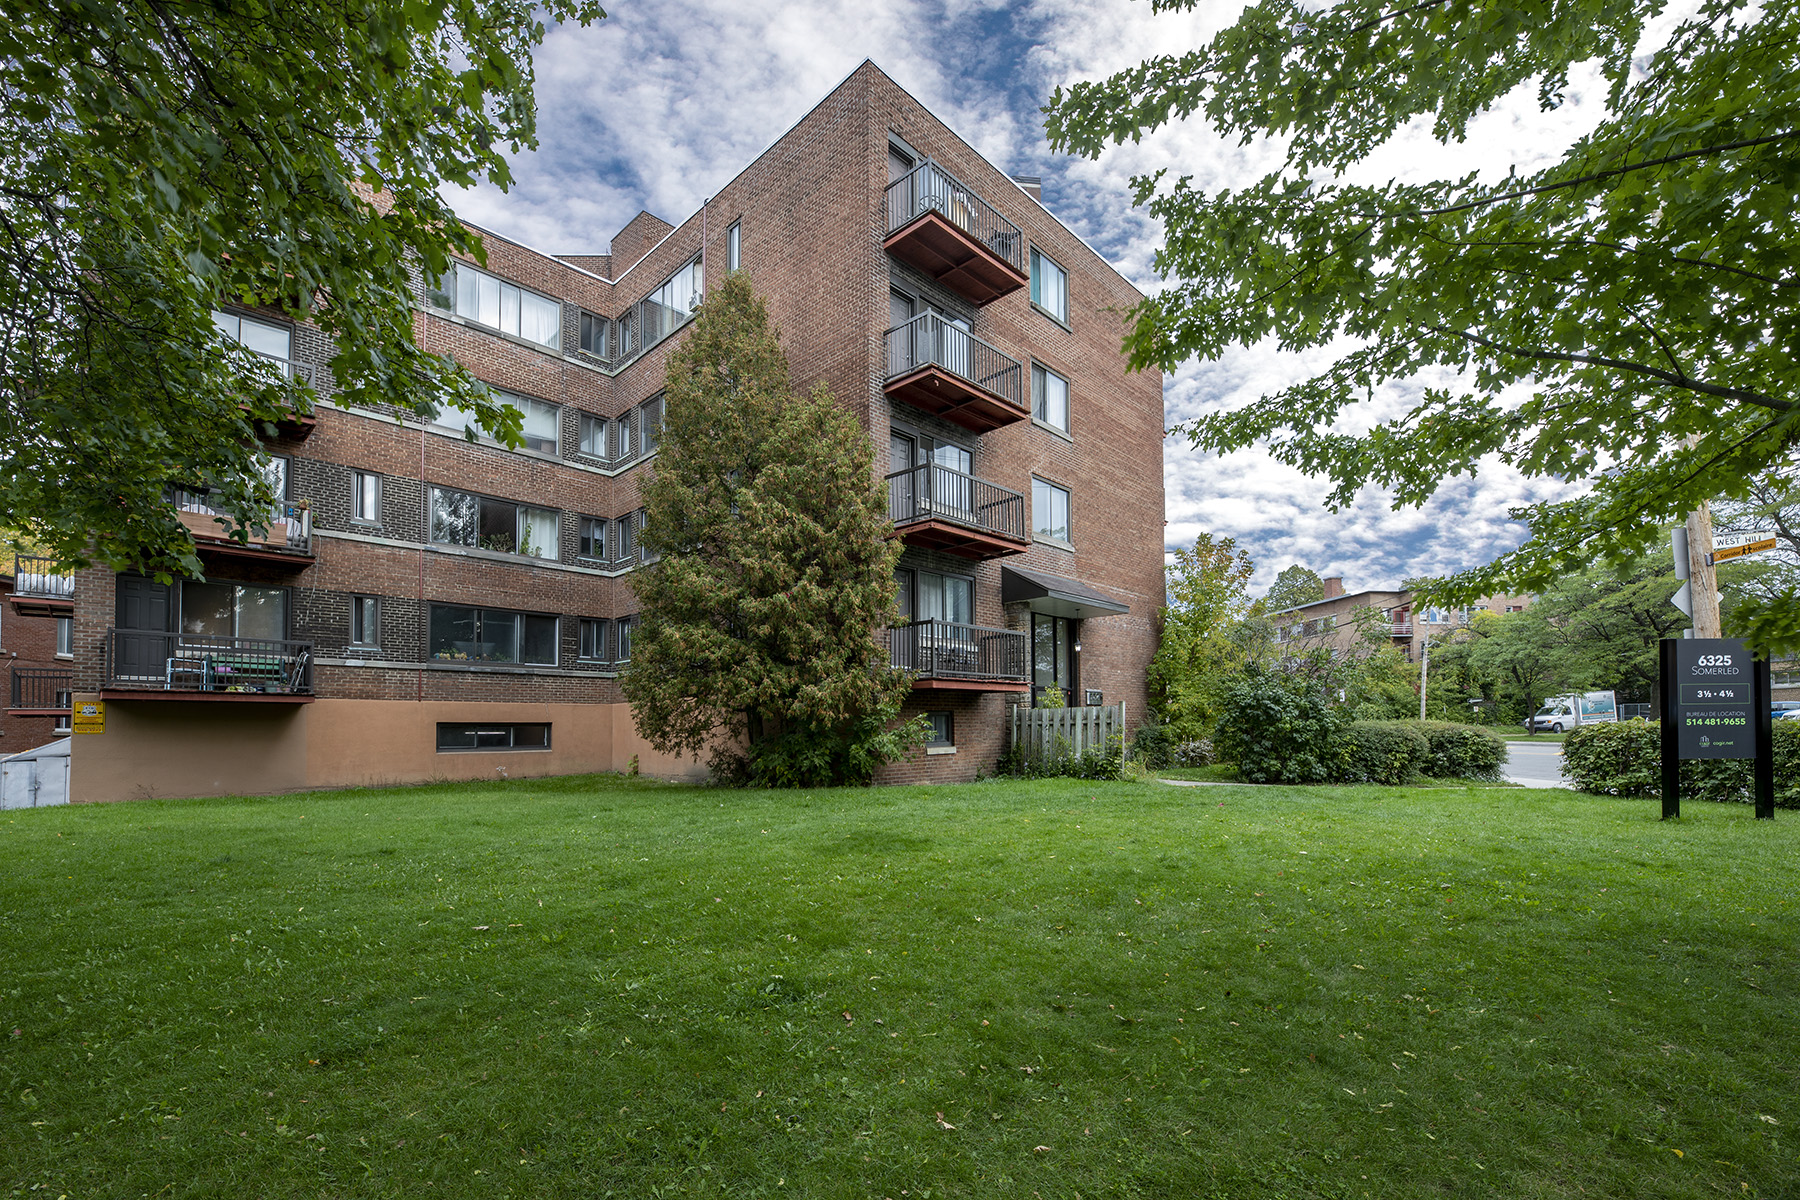 2 bedroom Apartments for rent in Notre-Dame-de-Grace at 6325 Somerled - Photo 02 - RentersPages – L401540